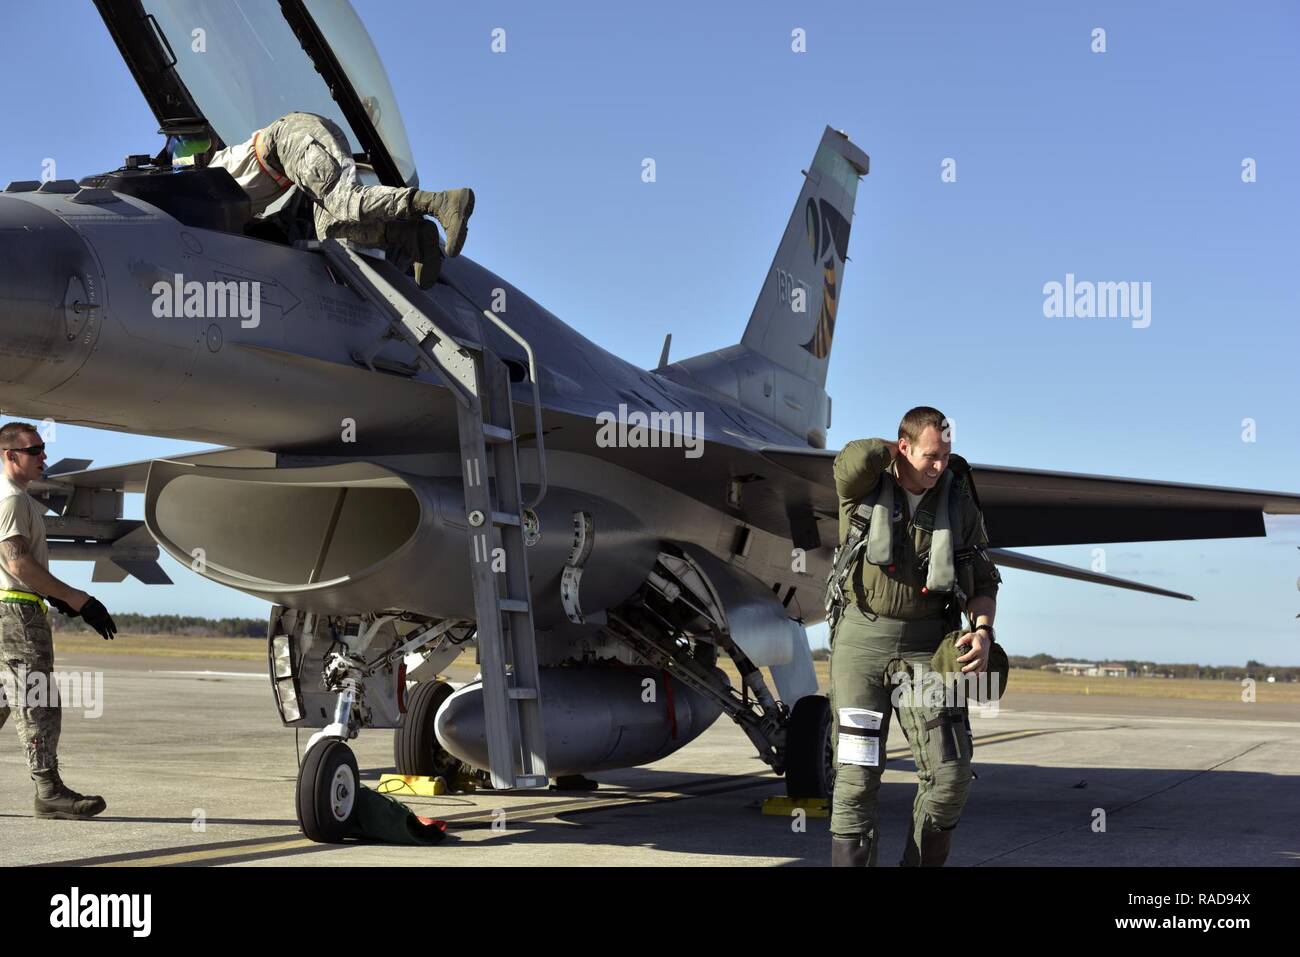 U.S. Air Force Captain Jerad Ames, F-16 pilot assigned to the 180th Fighter Wing, Ohio Air National Guard, exits a jet after his landing as crew chiefs start a process of checking the jet for mechanical issues and preparing for the next flight, known as recovery, at MacDill Air Force Base in Tampa, Florida, on Jan. 31, 2017. The 180th brought their F-16s, maintainers, pilots and operations specialists for a two-week  training exercise at MacDill, which included basic fight maneuvers against F-18 Hornets from the Canadian 425th Tactical Fighter Squadron. (Air National Guard Stock Photo